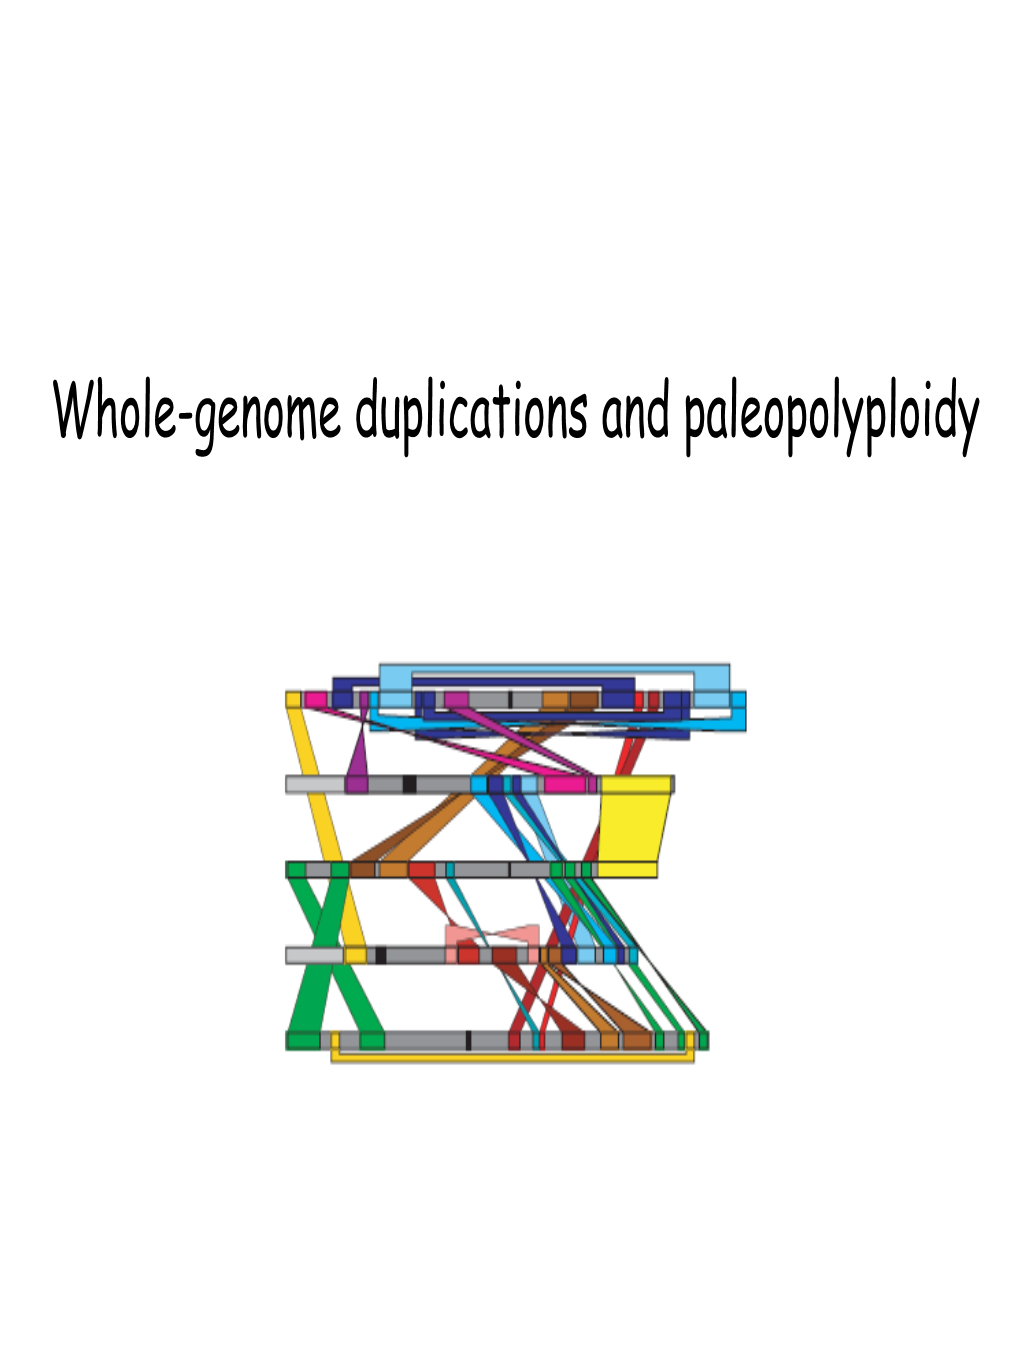 Whole-Genome Duplications and Paleopolyploidy Whole-Genome Duplications in Protozoa